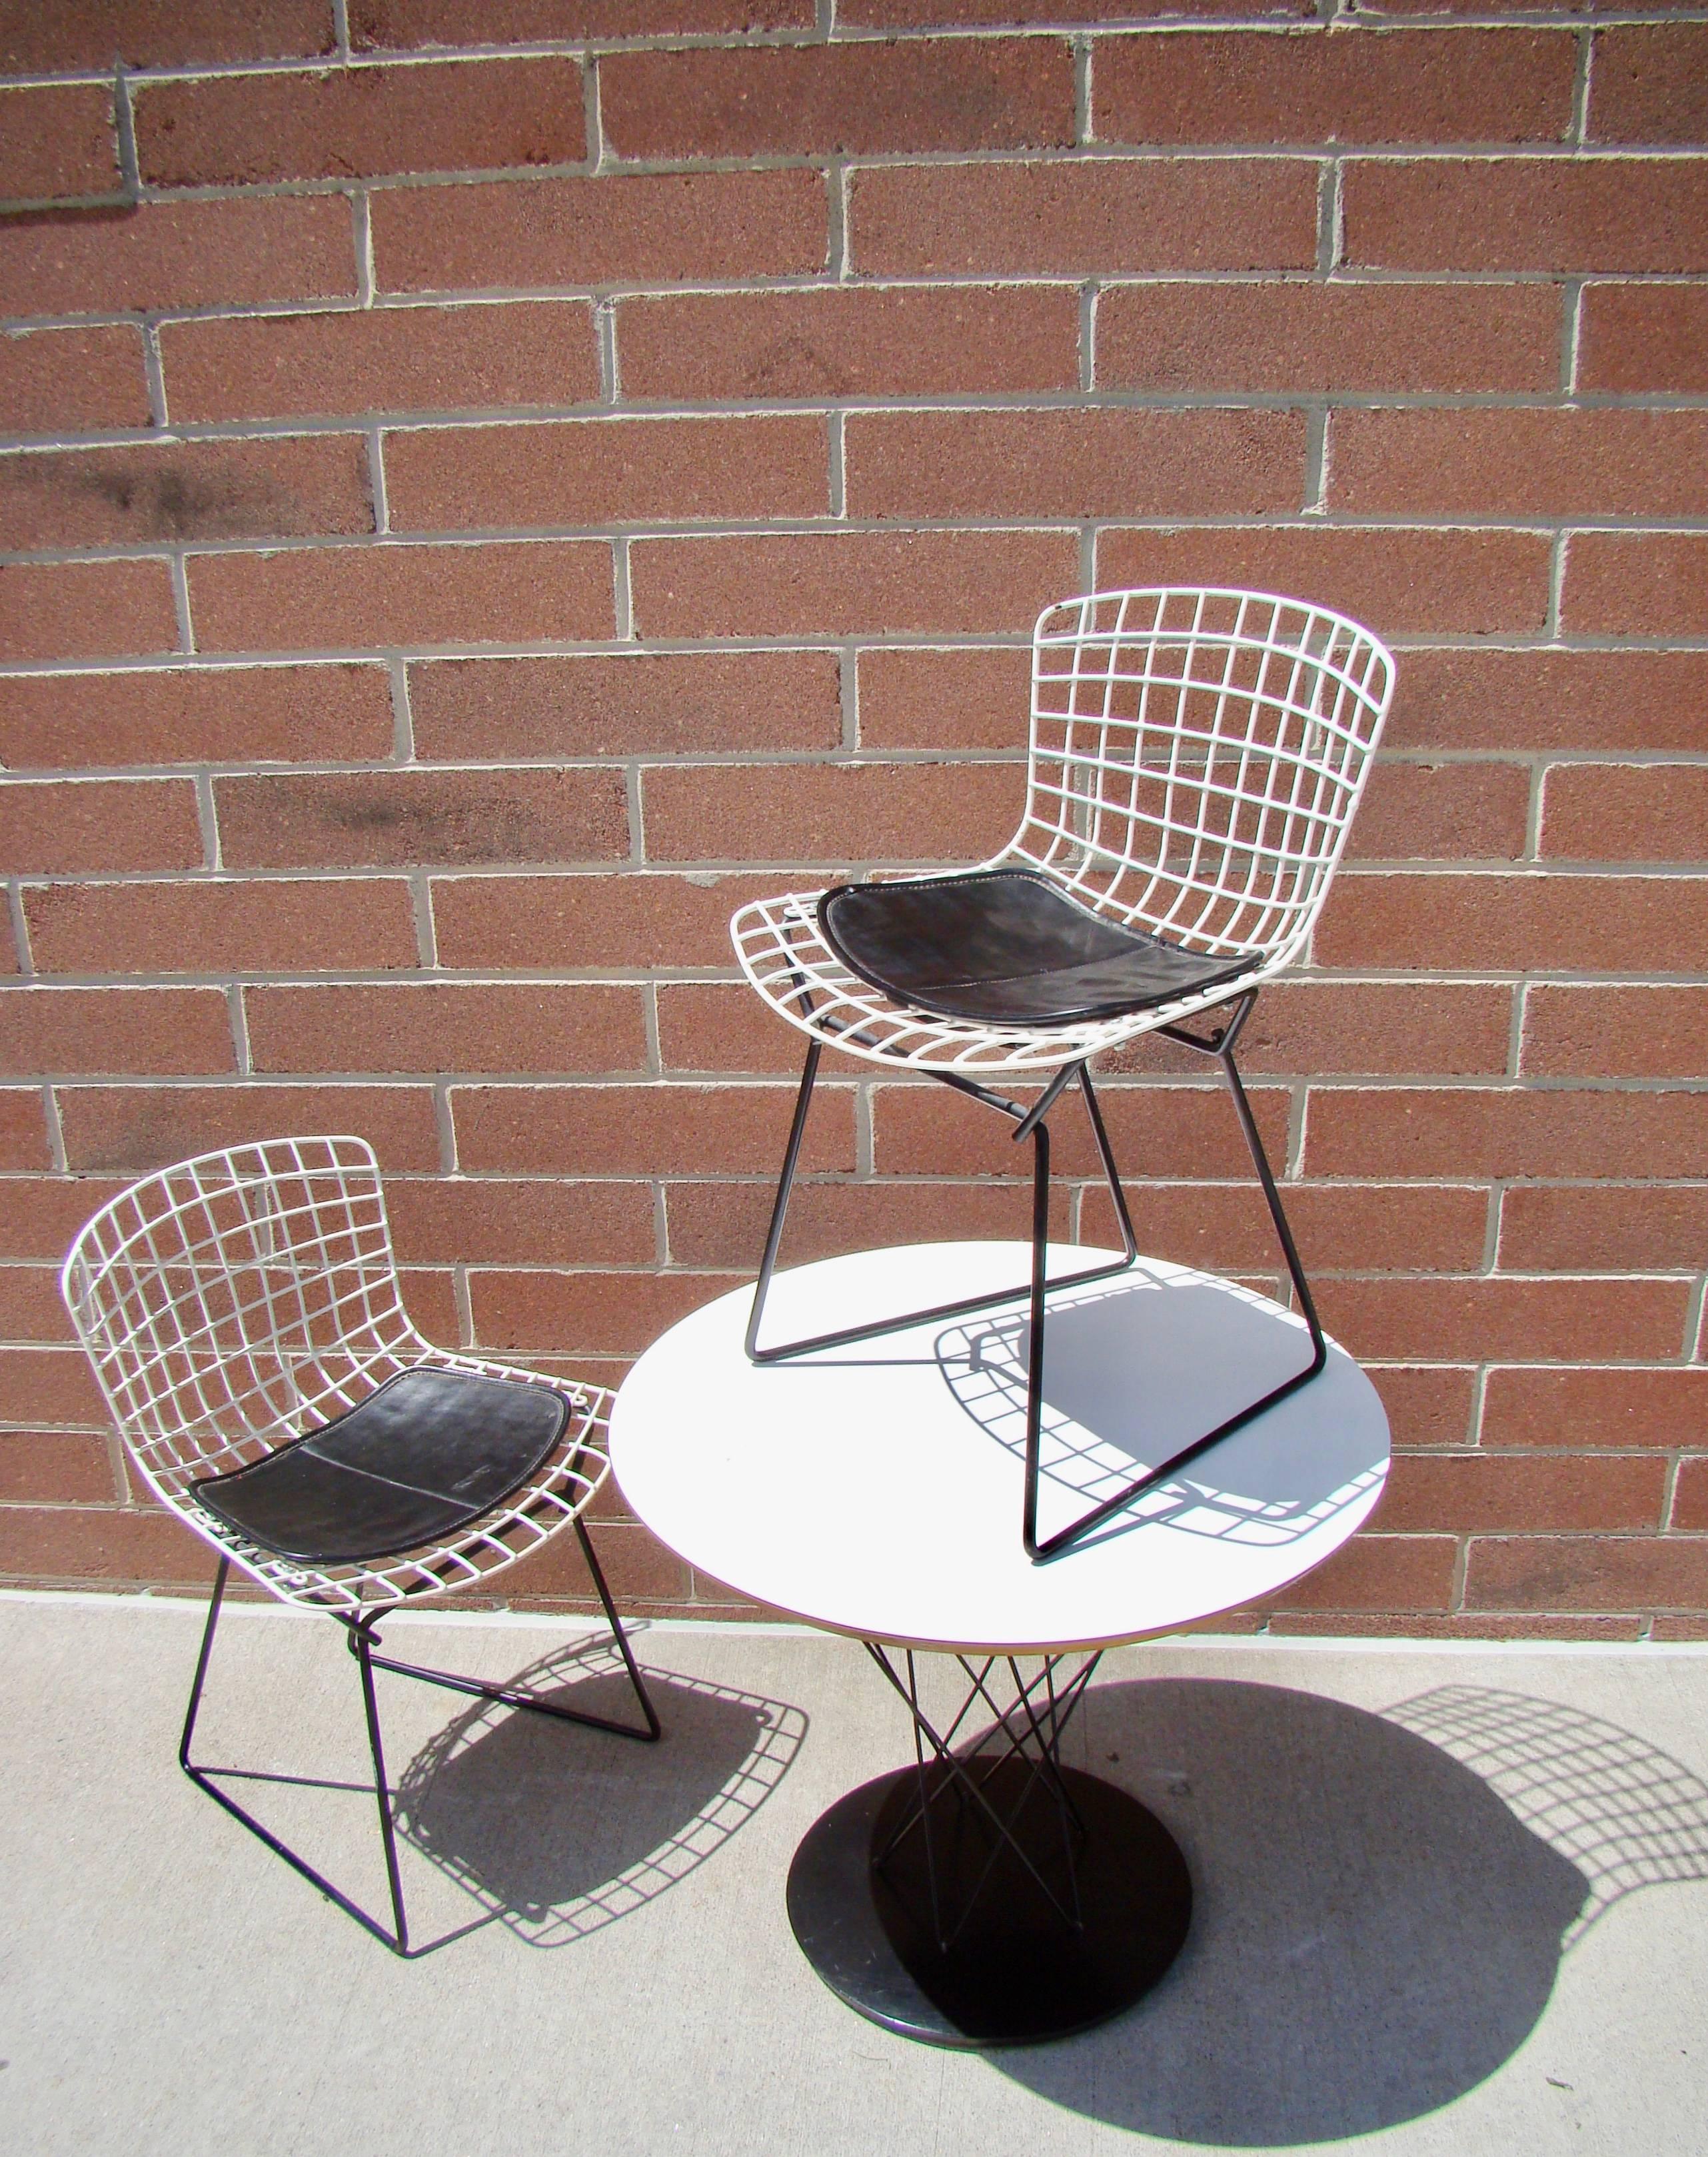 Early Noguchi cyclone table and Bertoia chairs with the original seat pads designed for Knoll. The cyclone table was originally designed as a child's table but is more commonly used as a side table. Table is marked with the Knoll sticker and is